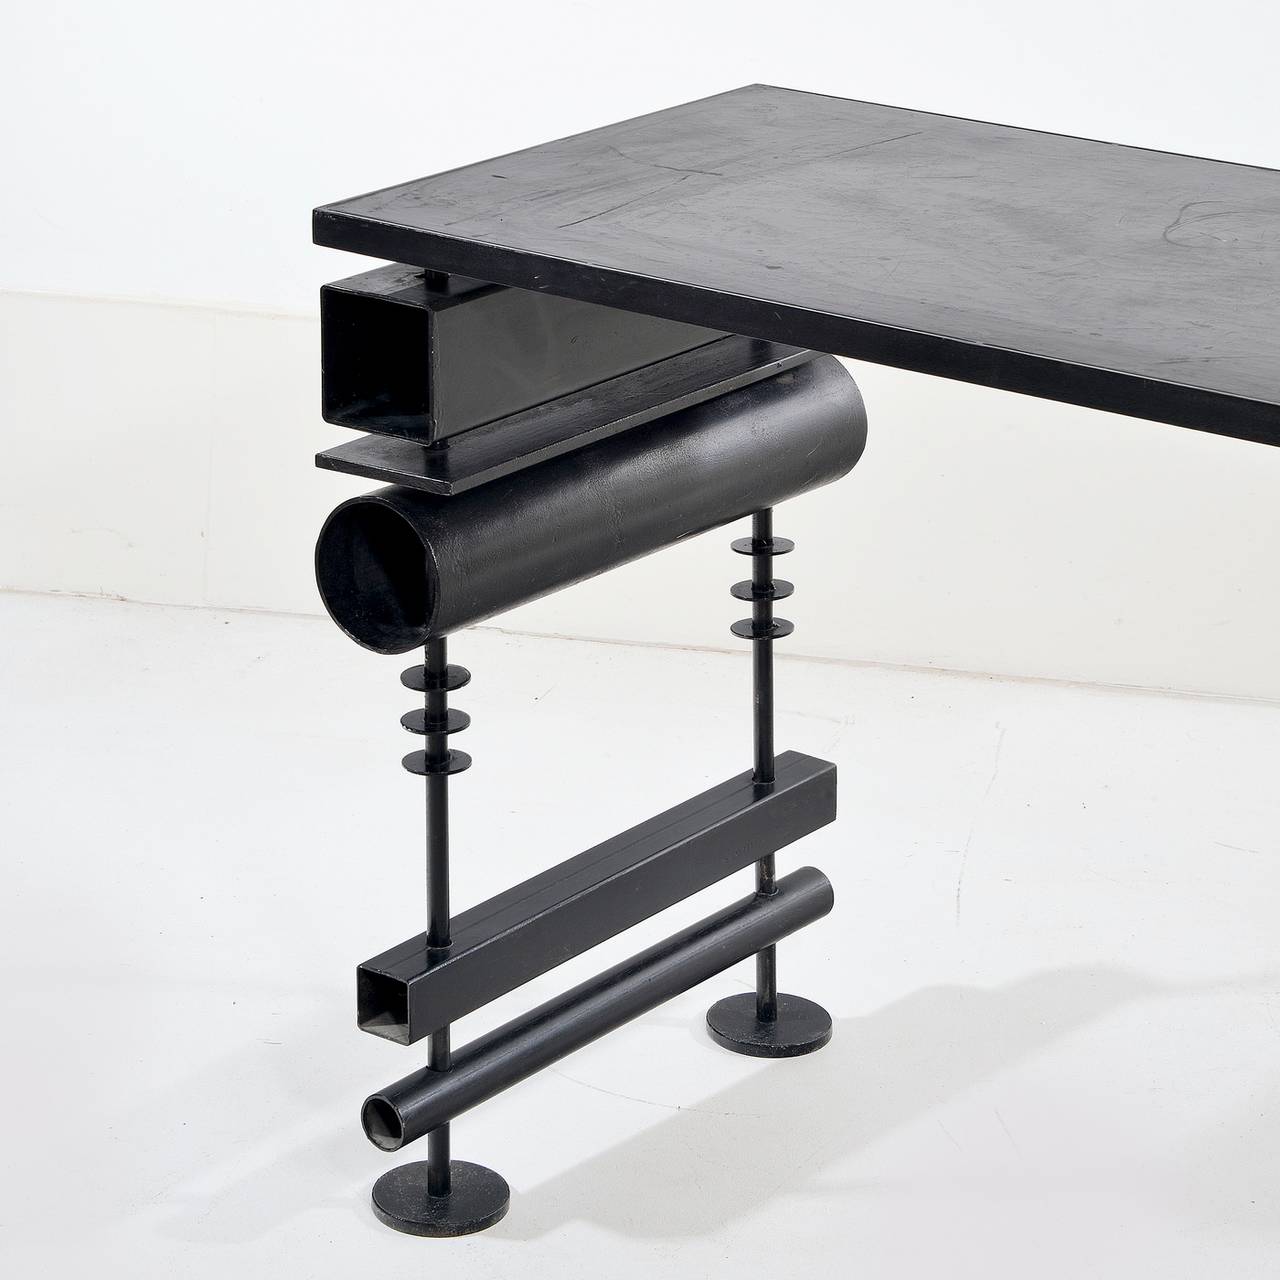 French Lacquered Metal Desk or Console by Hubert Le Gall